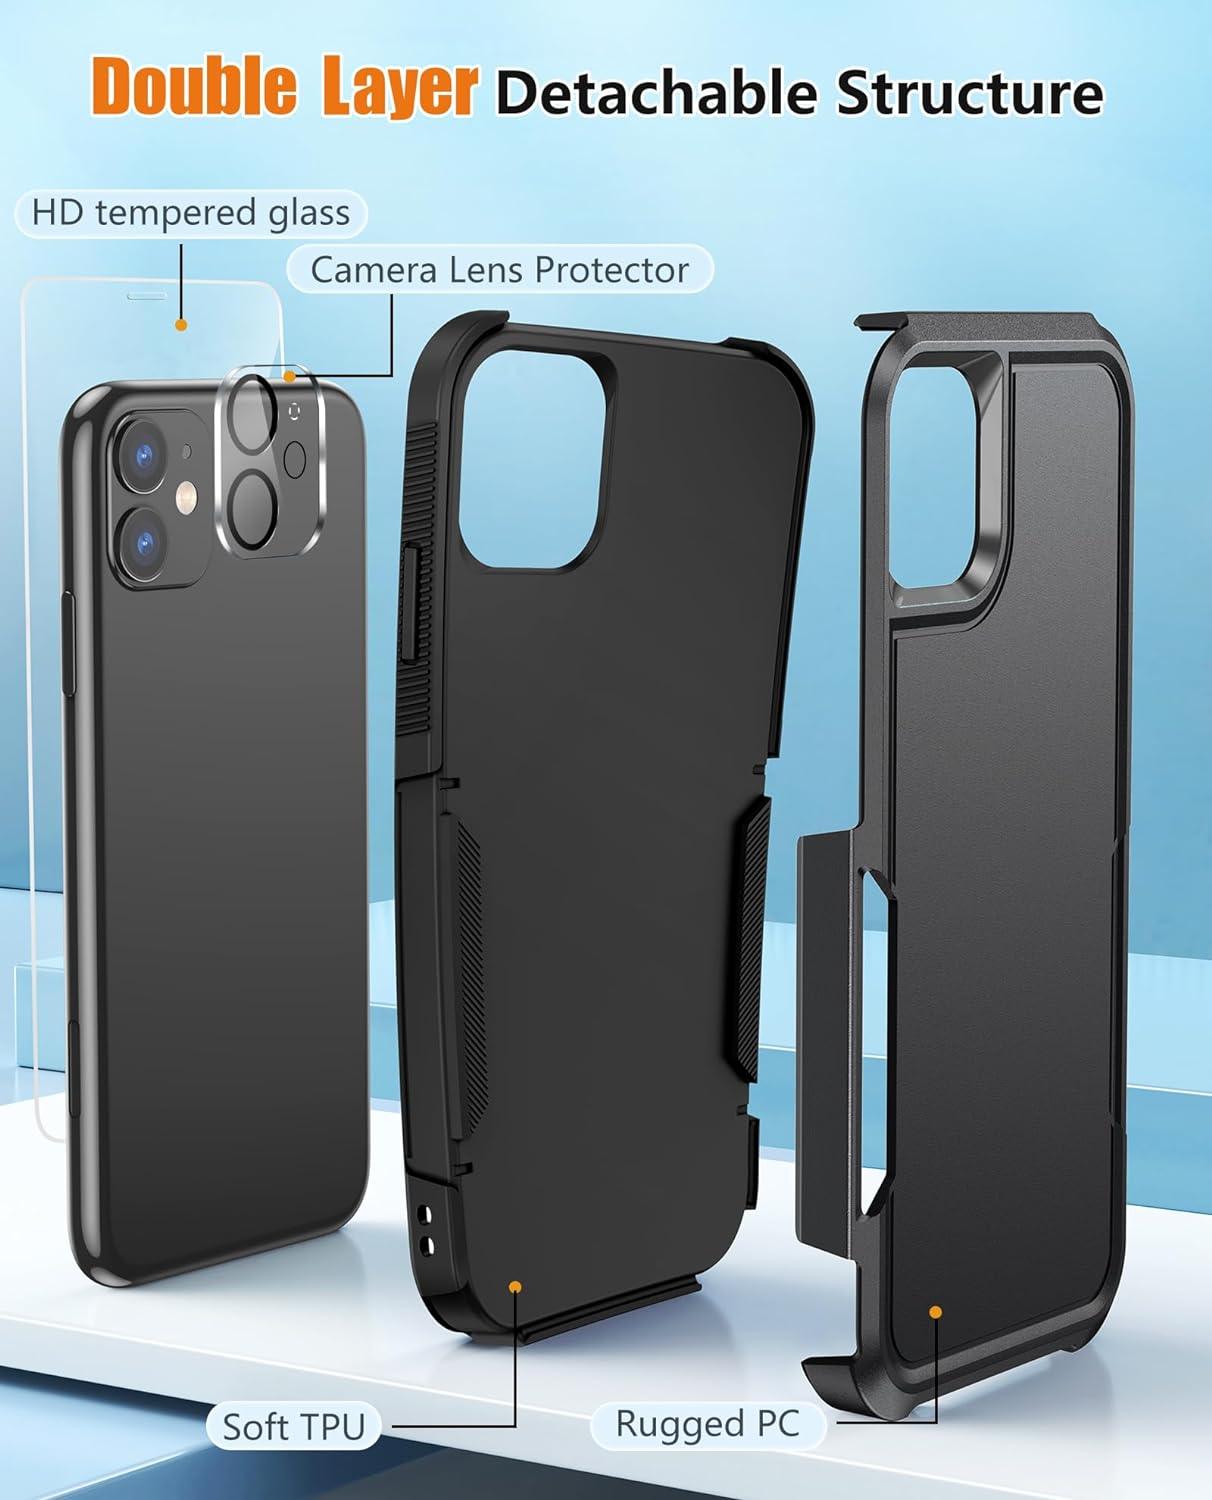 iPhone 11 6.1 inches Case: Shockproof Protective Military Grade Drop Dual Layer Case - FNTCASE OFFICIAL